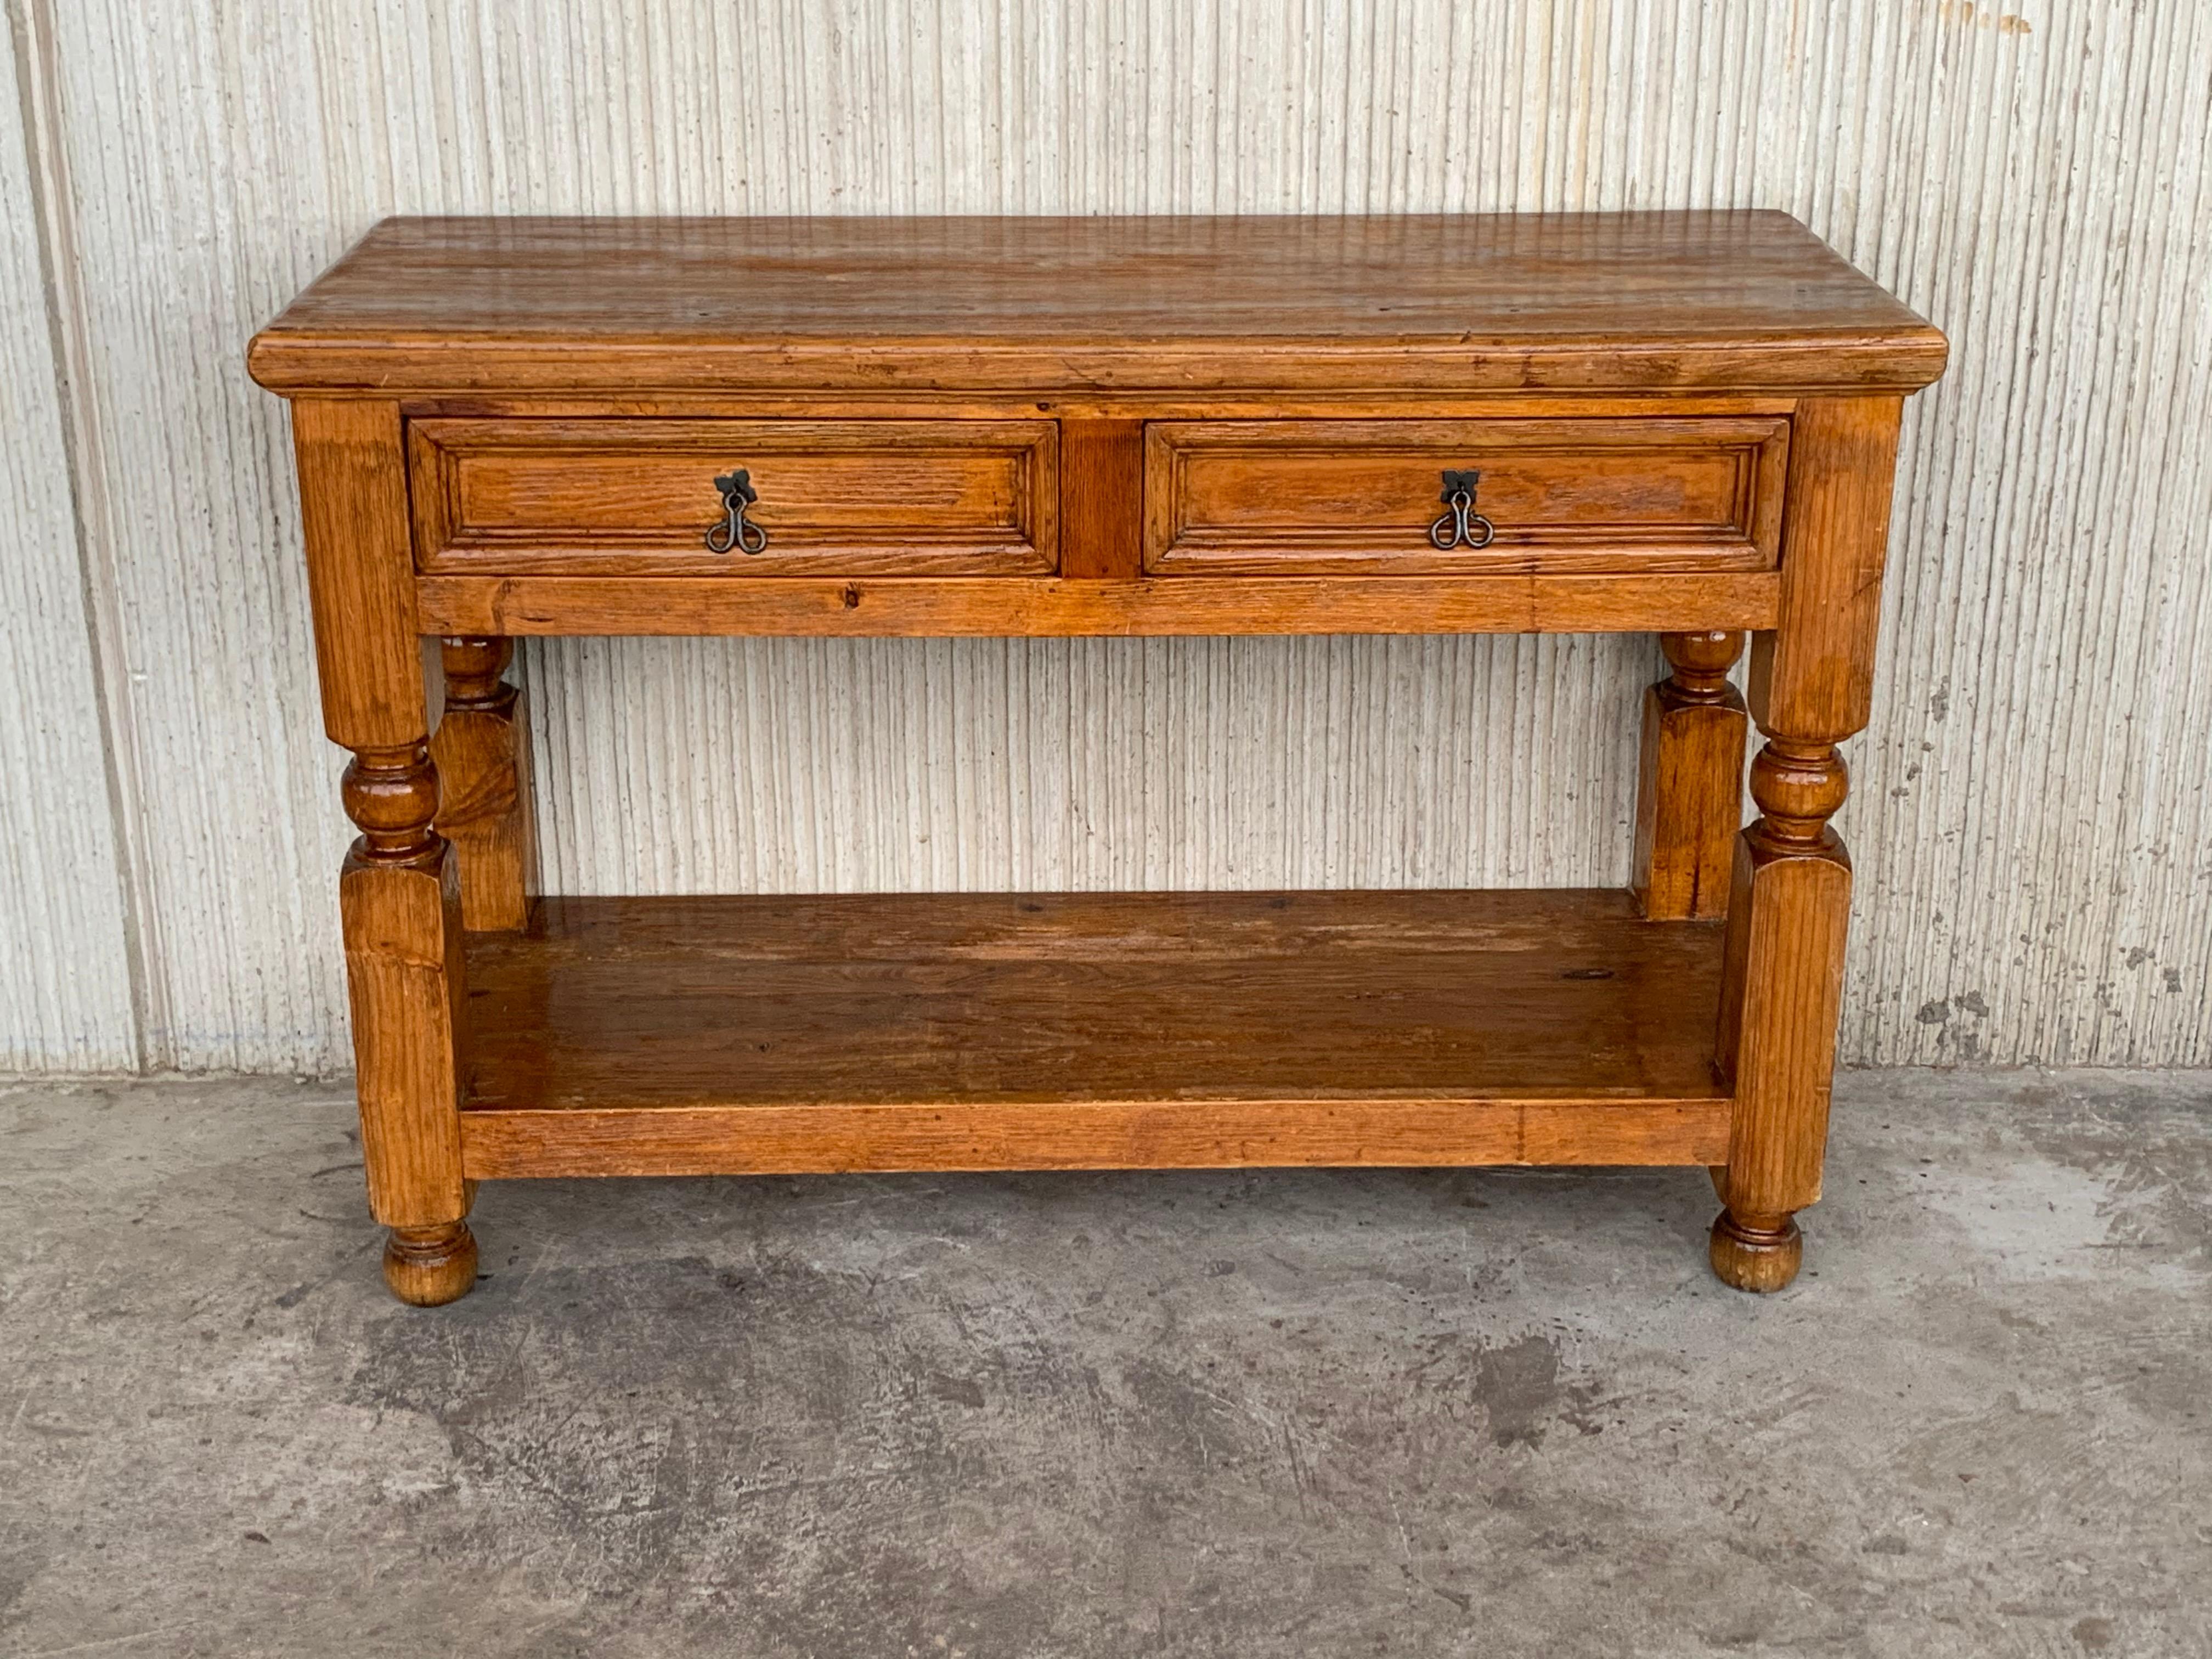 20th Century French Two-Drawer Console Table in Antique Pine with Low Shelve